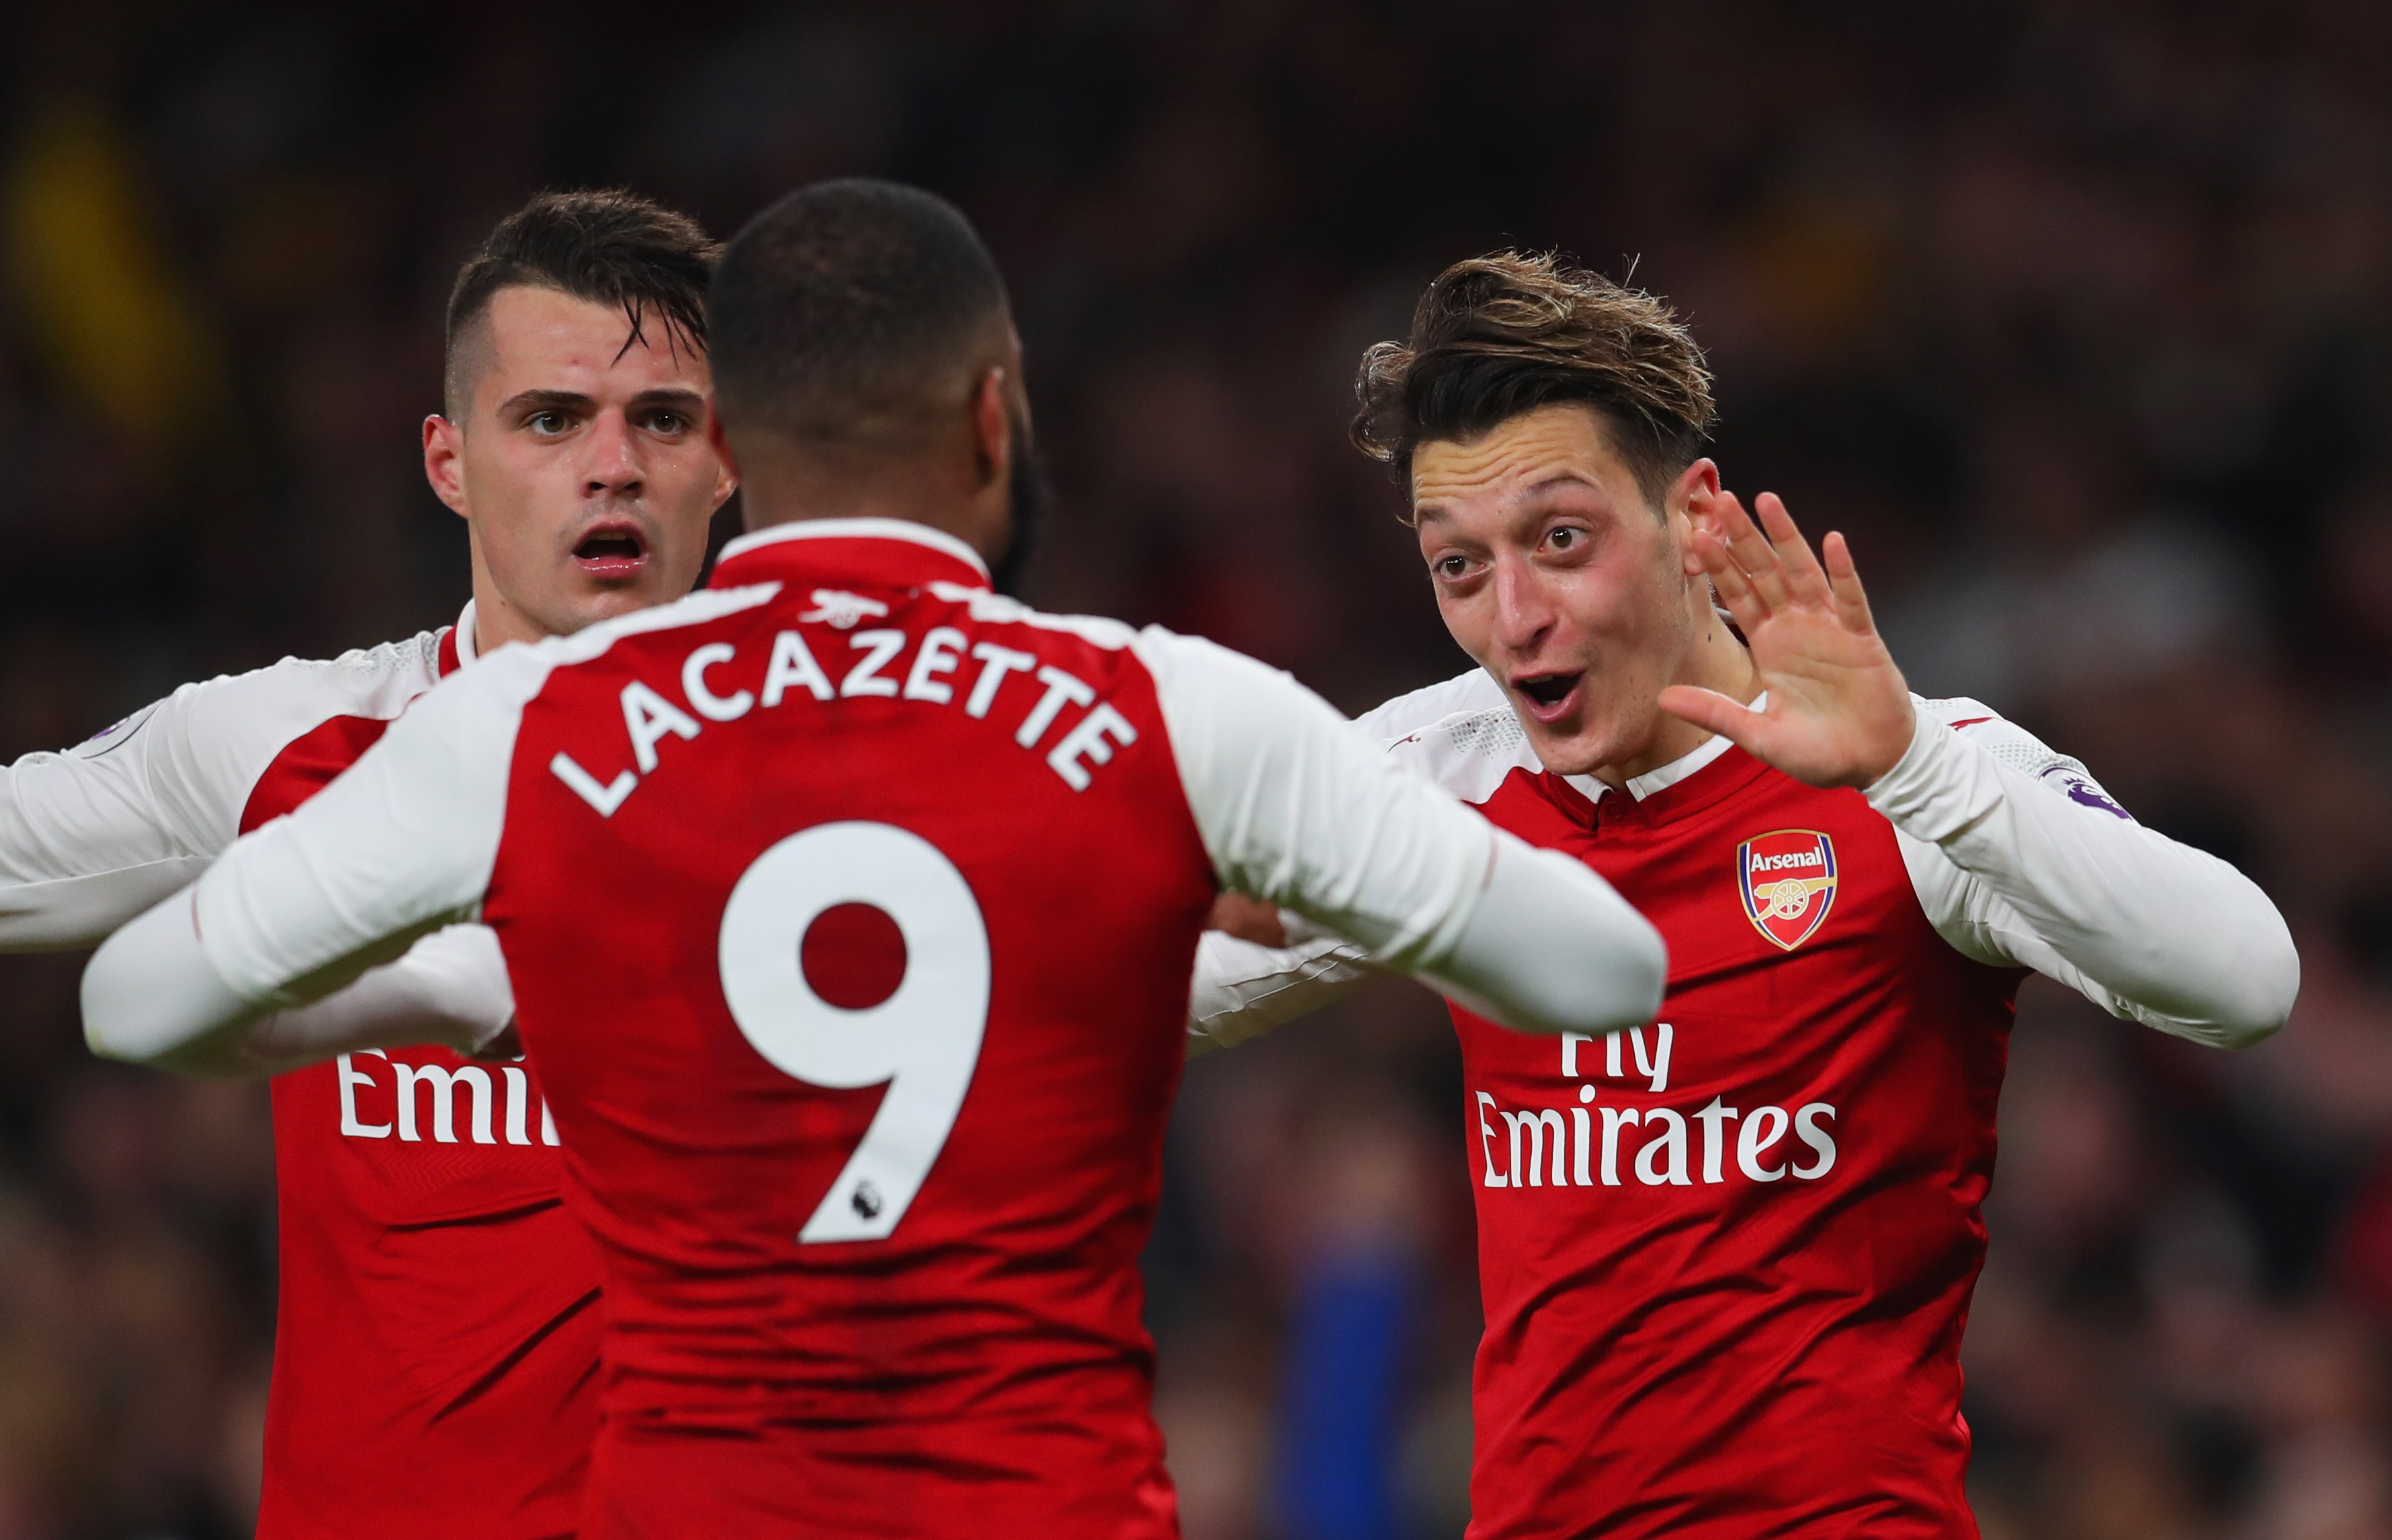 LONDON, ENGLAND - DECEMBER 22:  Mesut Ozil of Arsenal (R) celebrates as he scores their third goal with Granit Xhaka and Alexandre Lacazette during the Premier League match between Arsenal and Liverpool at Emirates Stadium on December 22, 2017 in London, England.  (Photo by Catherine Ivill/Getty Images)